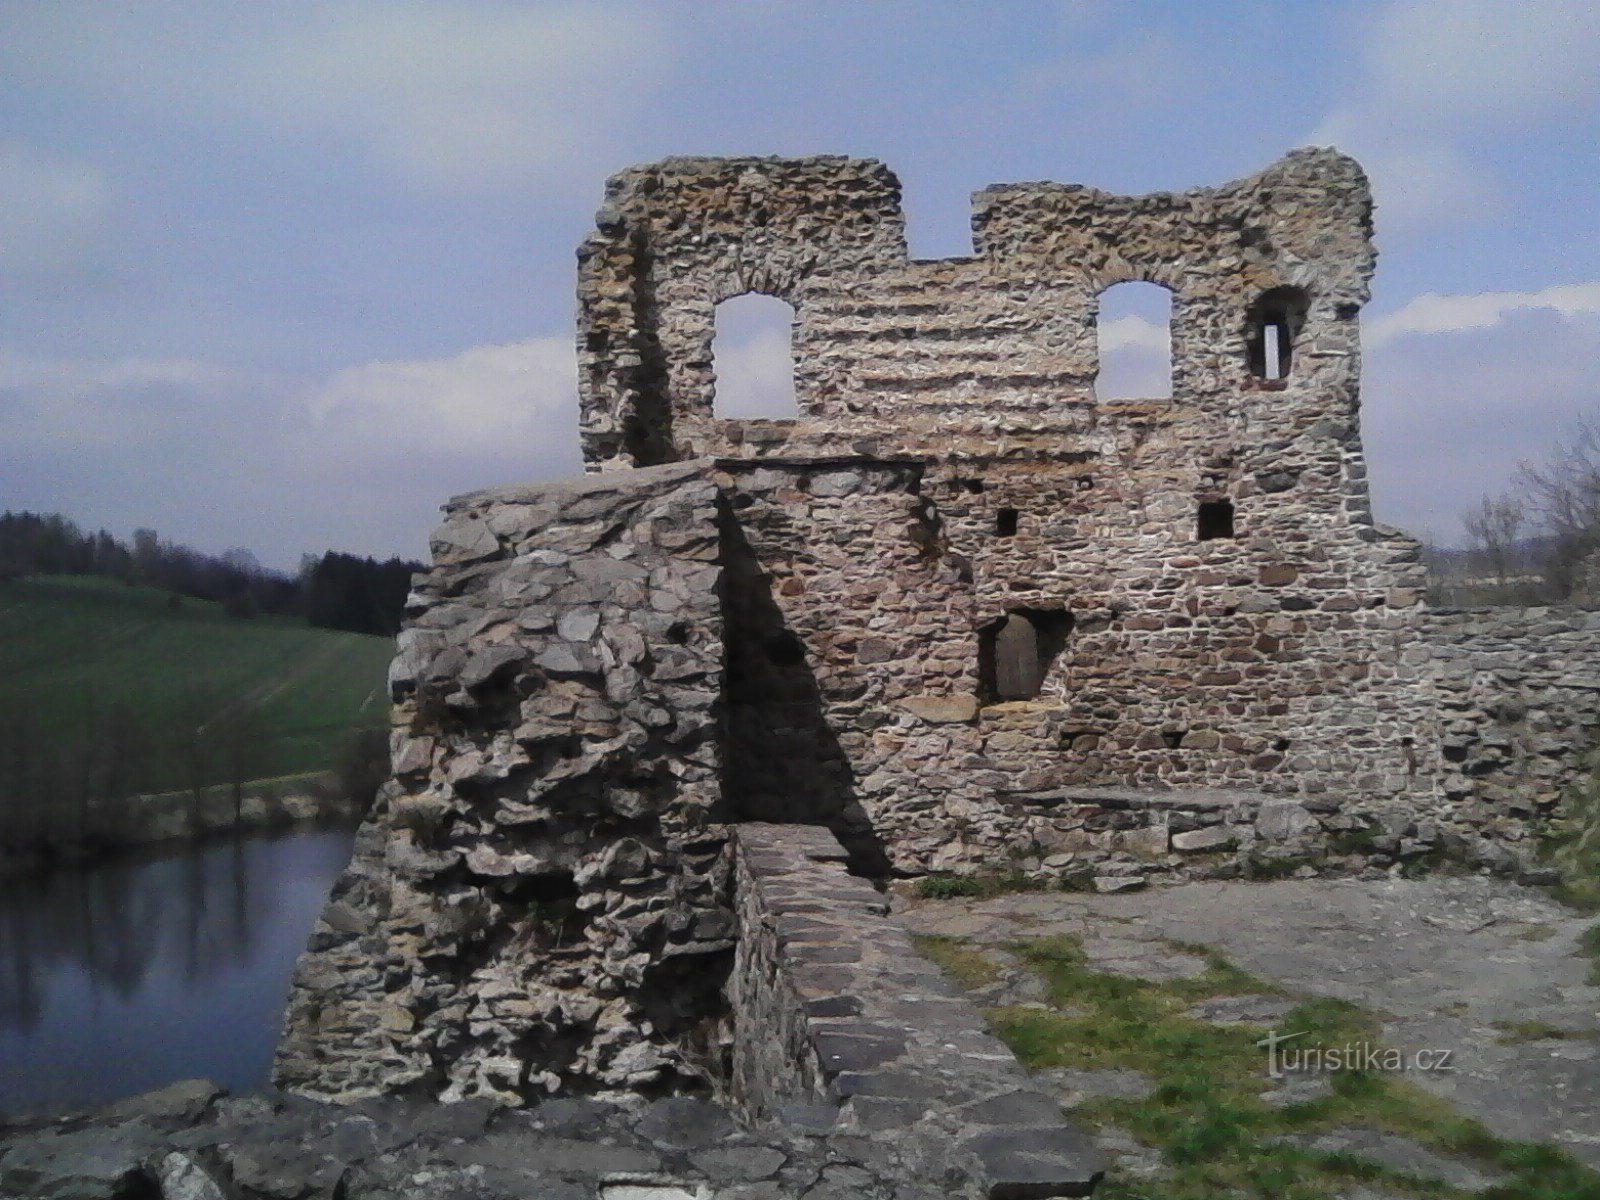 3. Even a ruin can be beautiful.